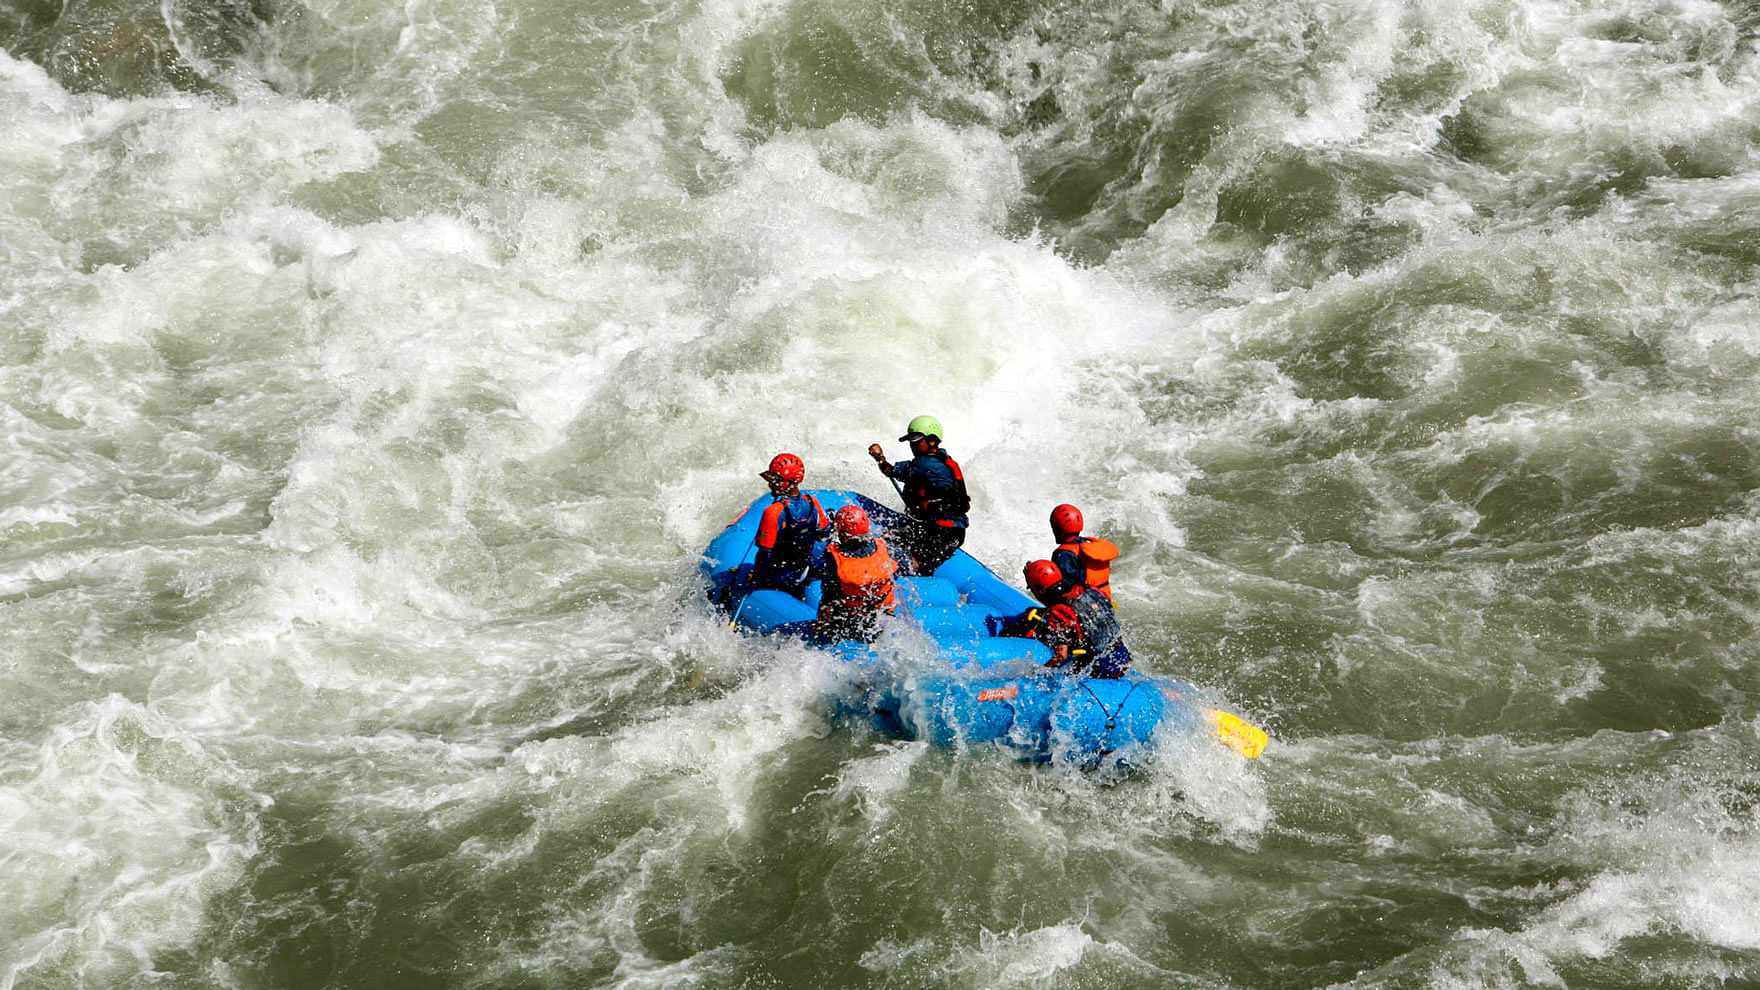  An image of people on a river raft used for representational purposes.